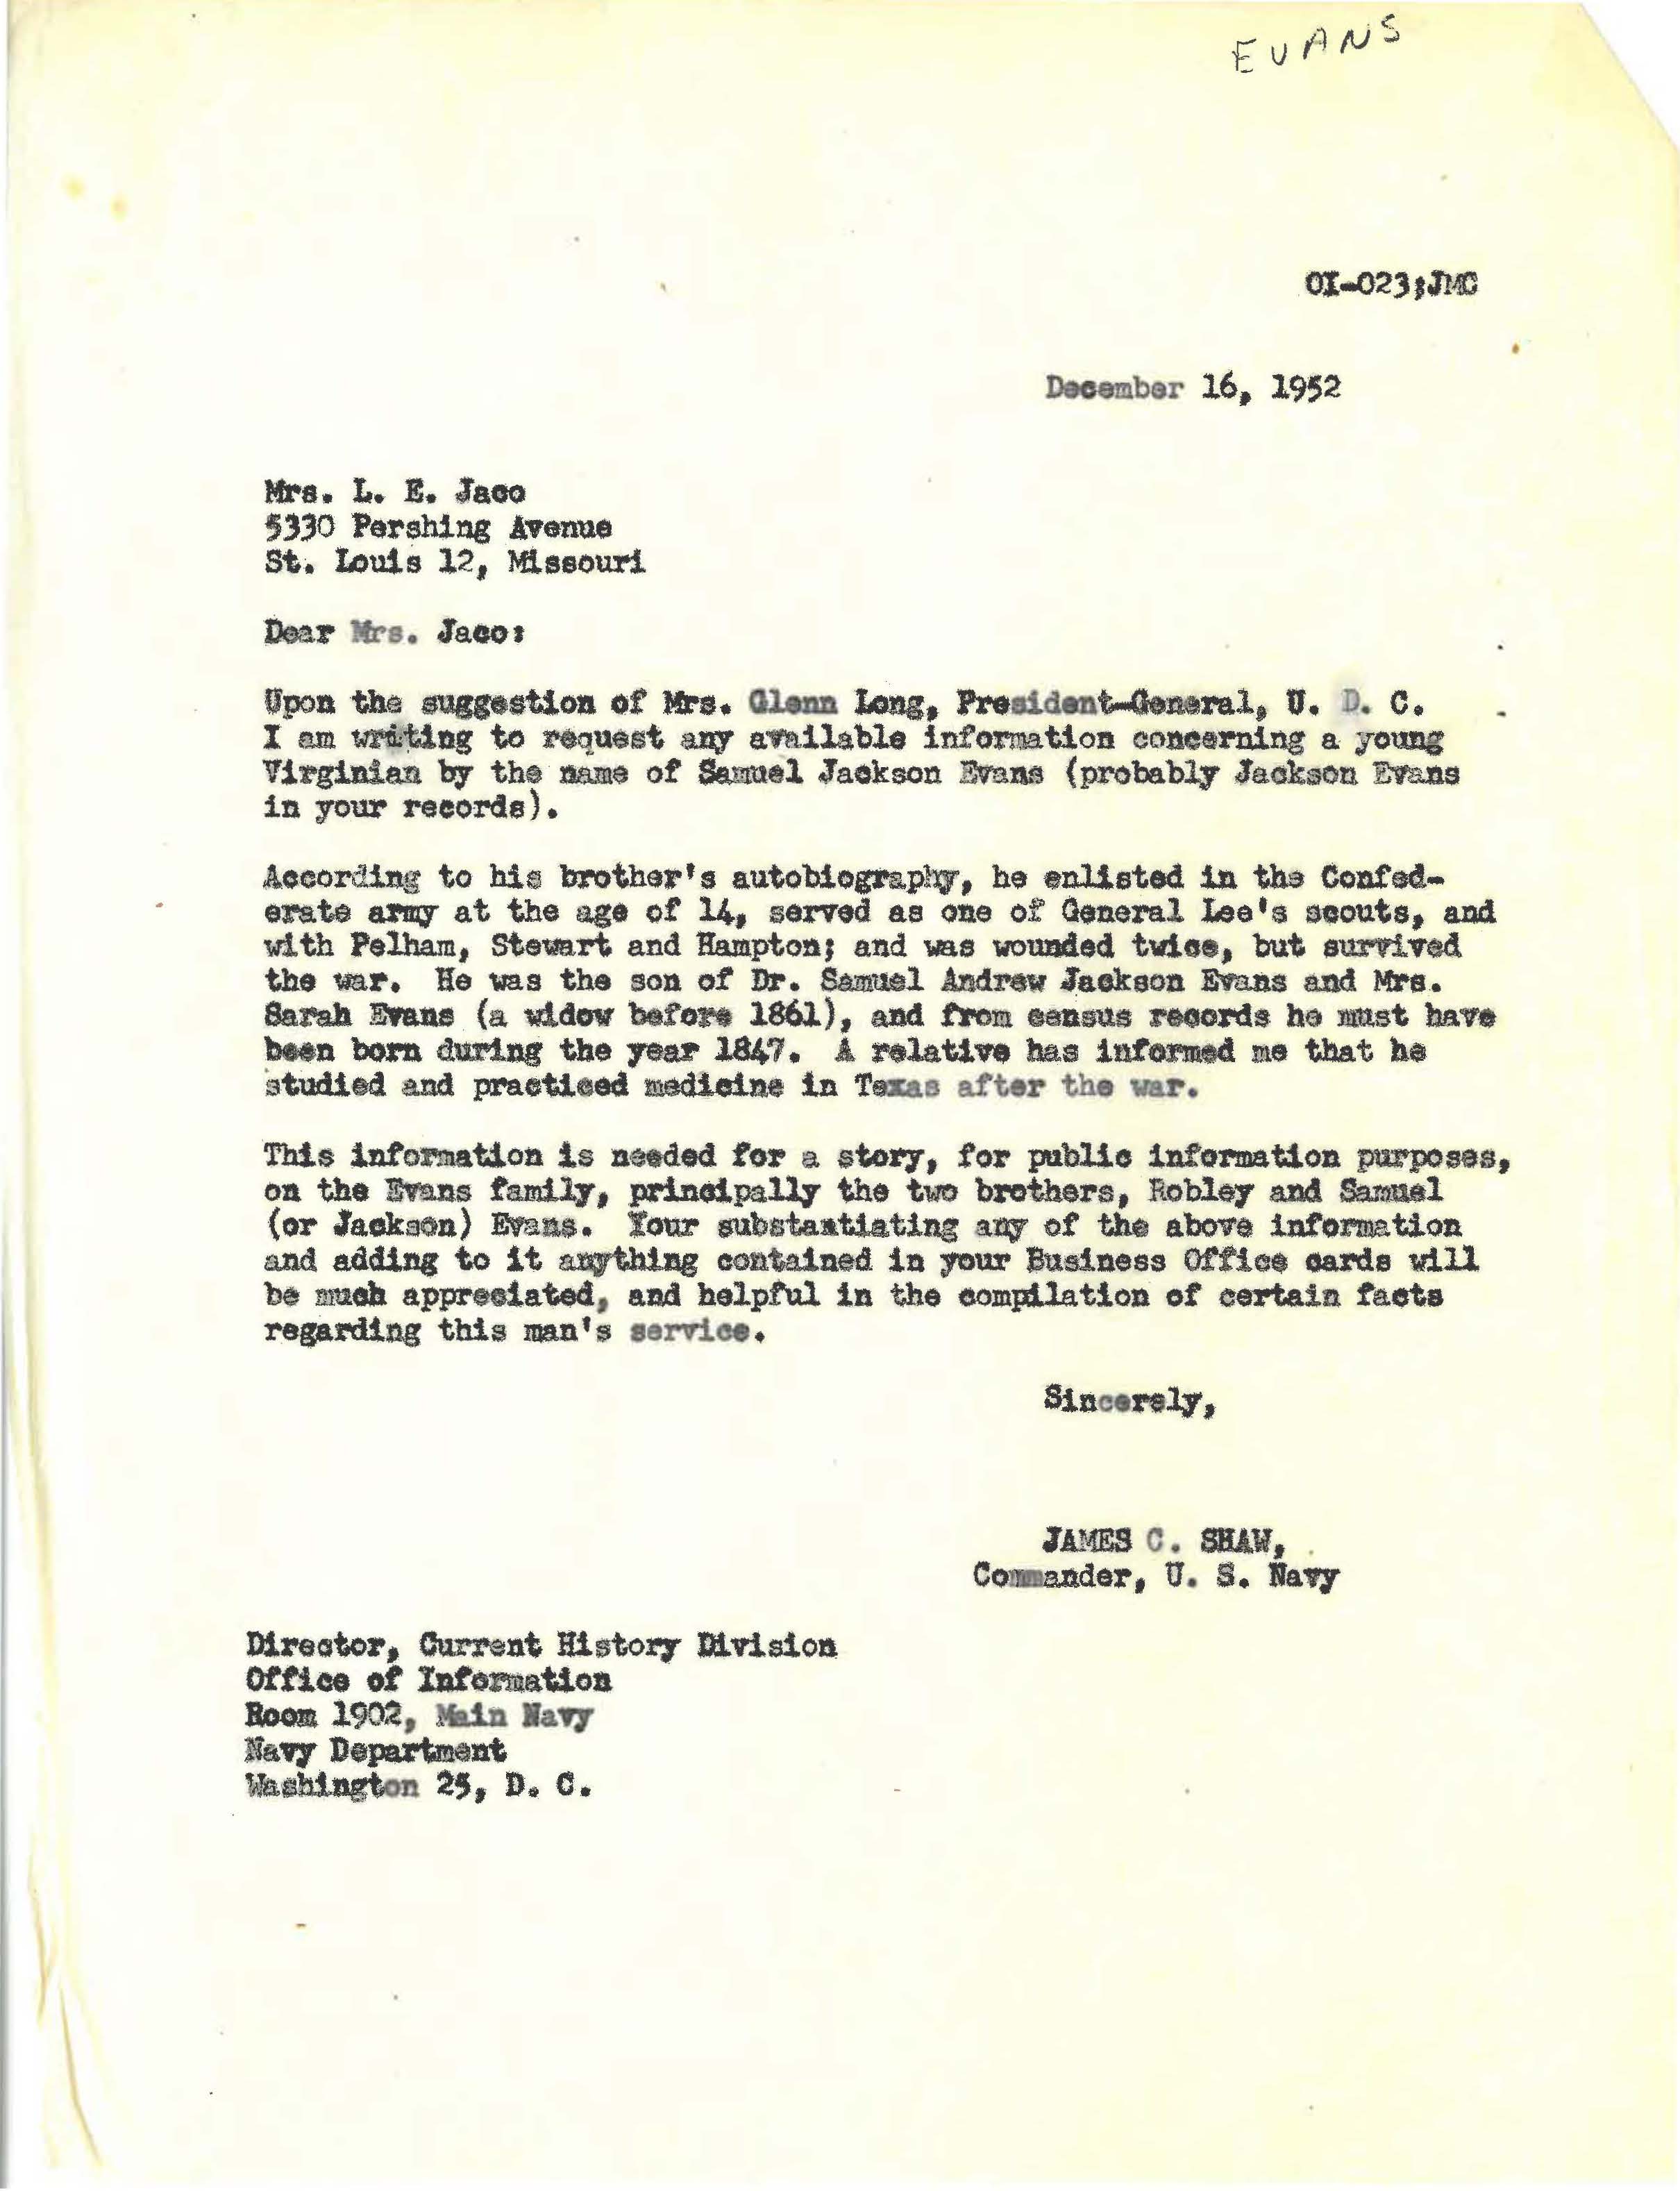 Shaw letter to Mrs. L.E. Jaco